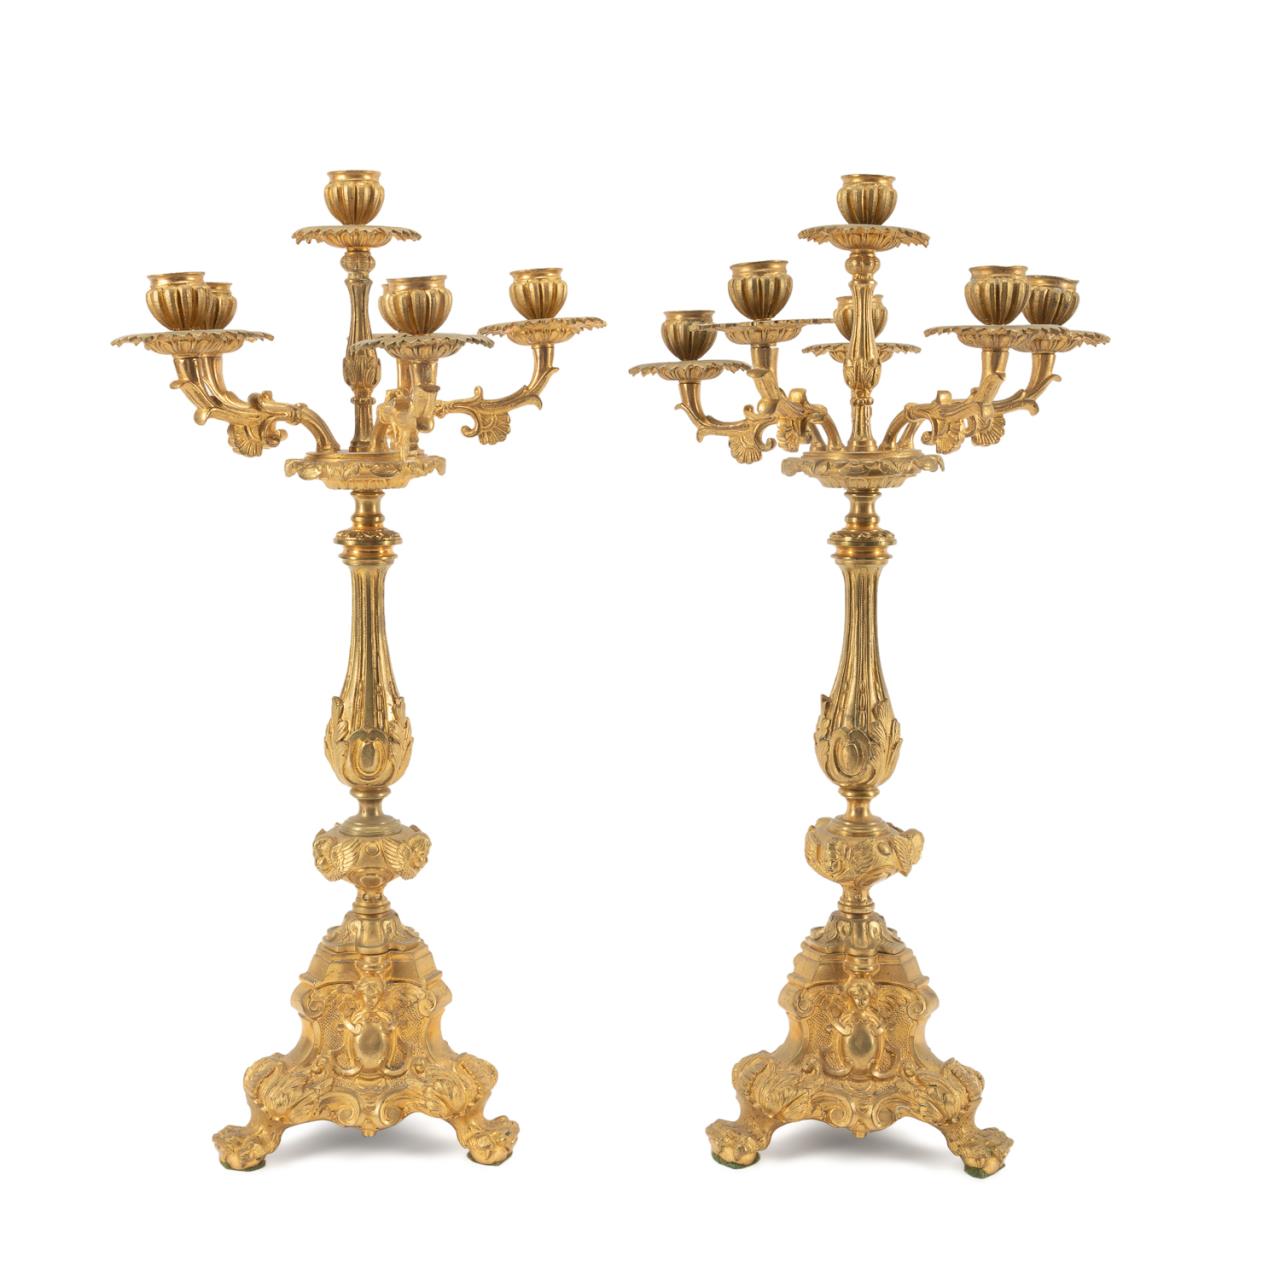 PAIR OF BAROQUE REVIVAL GILT BRONZE 2bfd65